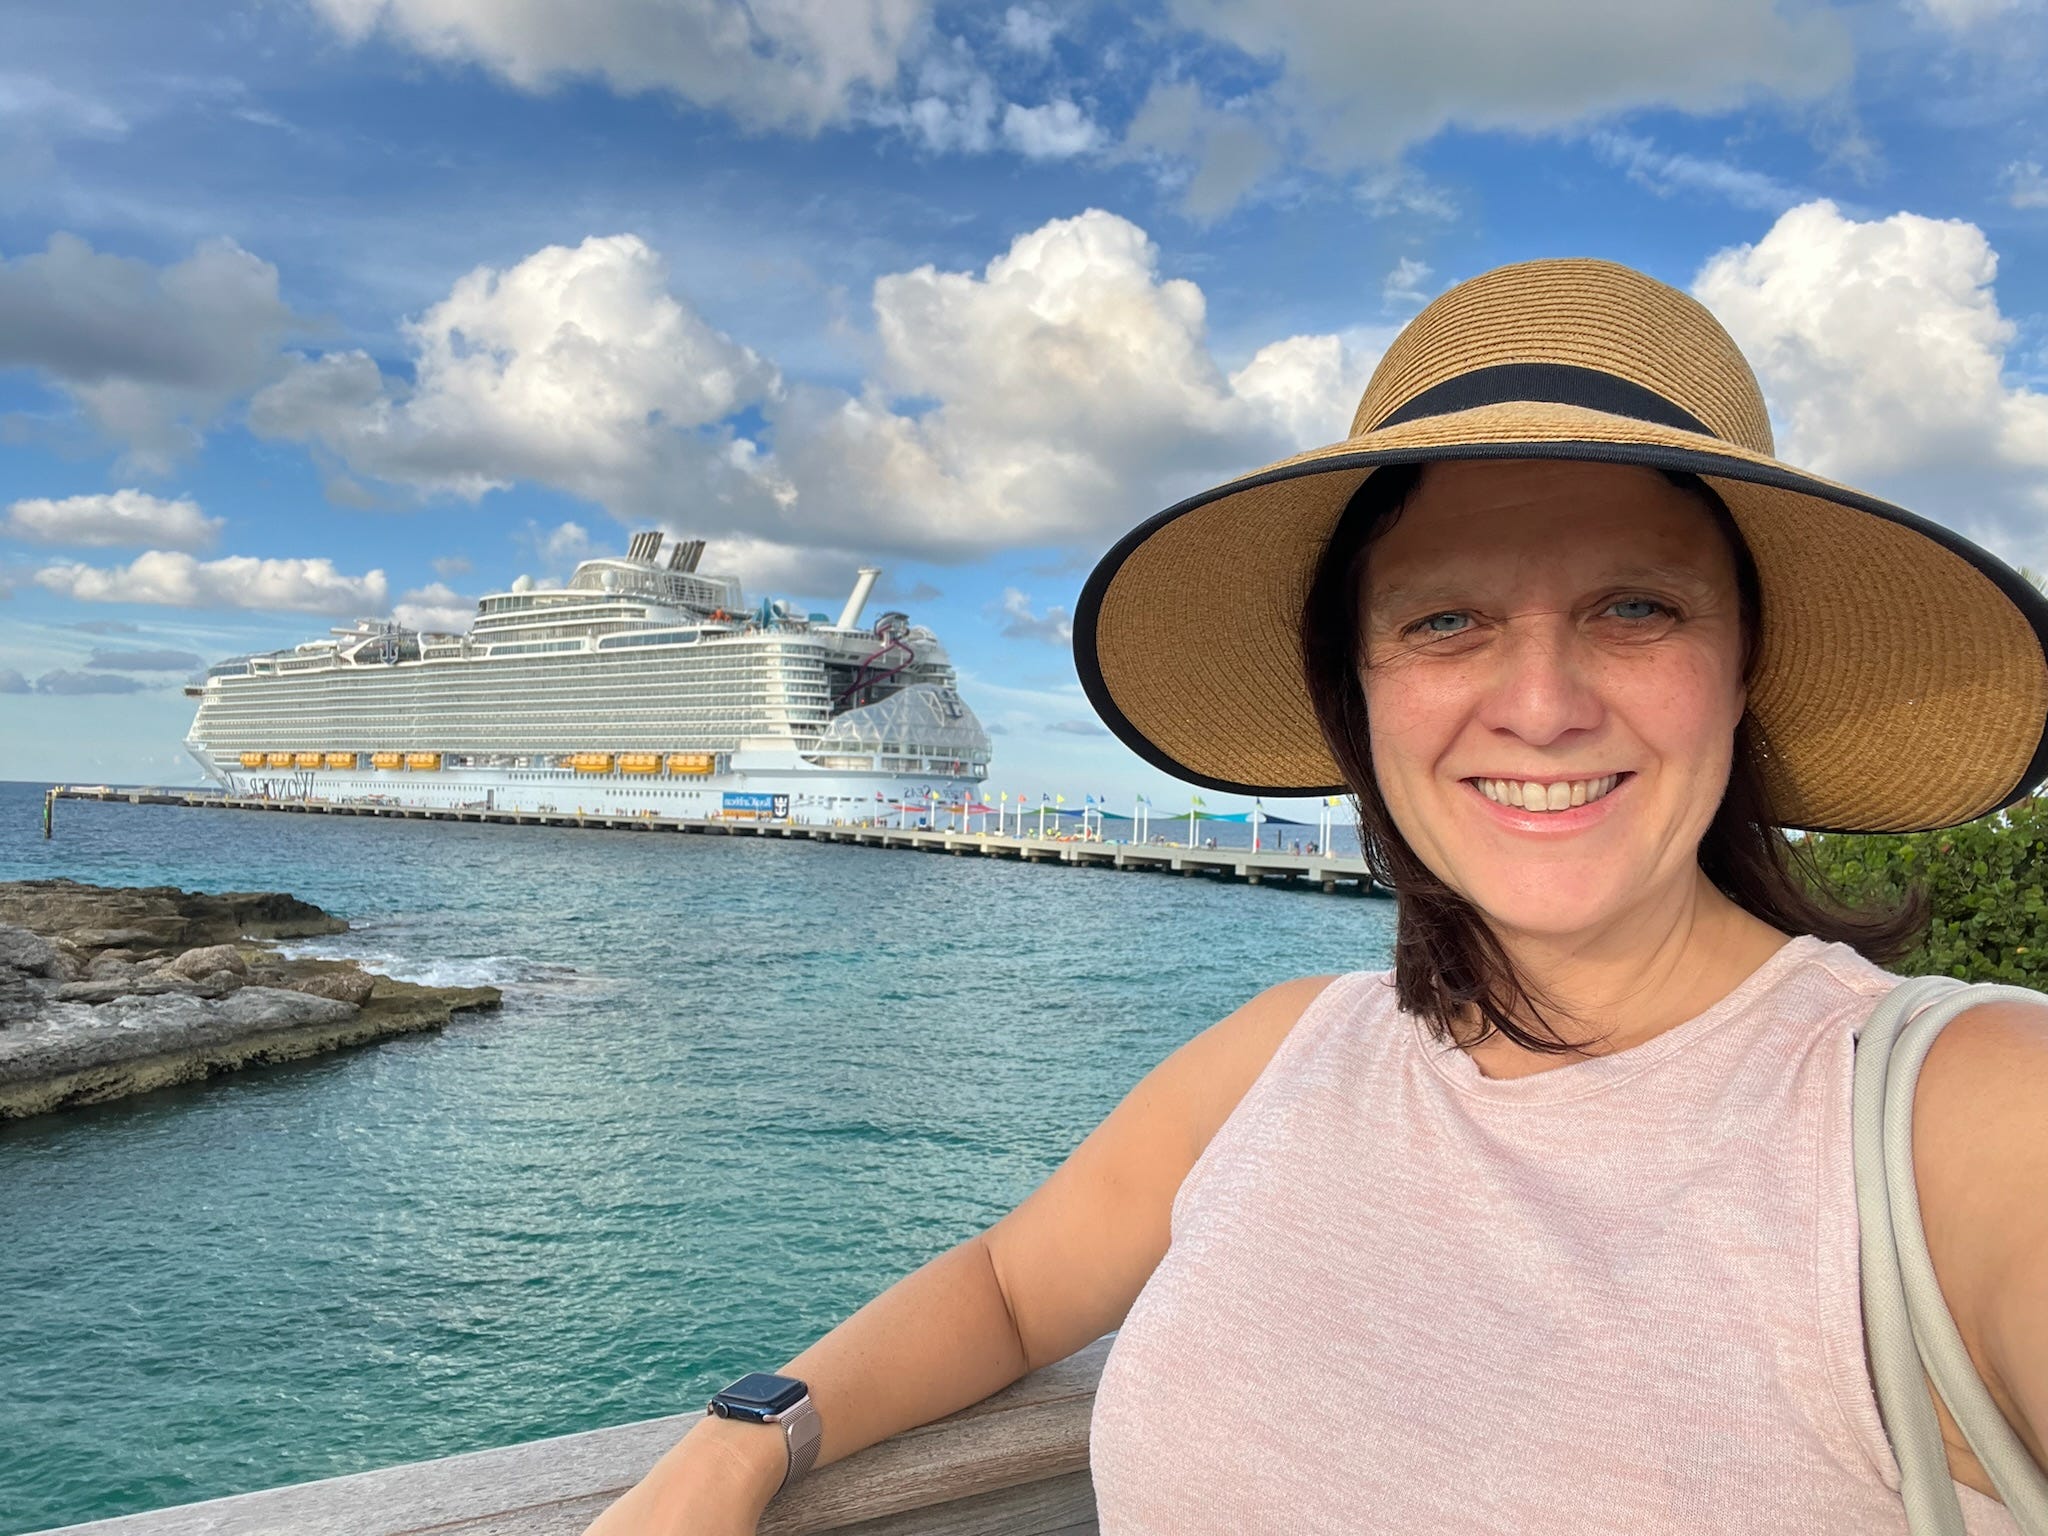 <p>Cruising is one of the <a href="https://www.businessinsider.com/top-summer-trip-destinations-travel-spots-countries-google-flights-2024-4">most popular vacations</a>, whether it's an epic adventure on a Royal Caribbean Cruise, a couples-only journey on Virgin Voyages, or a regal tour of Europe on Viking River Cruises.</p><p>Although cruises aren't traditionally considered all-inclusive, with the right booking, they can have the same feel as a luxury resort.</p><p>Most <a href="https://www.businessinsider.com/why-rooms-windows-balconies-not-worth-it-frequent-cruiser-2024">cruise bookings</a> include food, nonalcoholic drinks, and live entertainment. If you add beverage packages and excursions in advice, your trip should be fully paid for before you depart.</p>